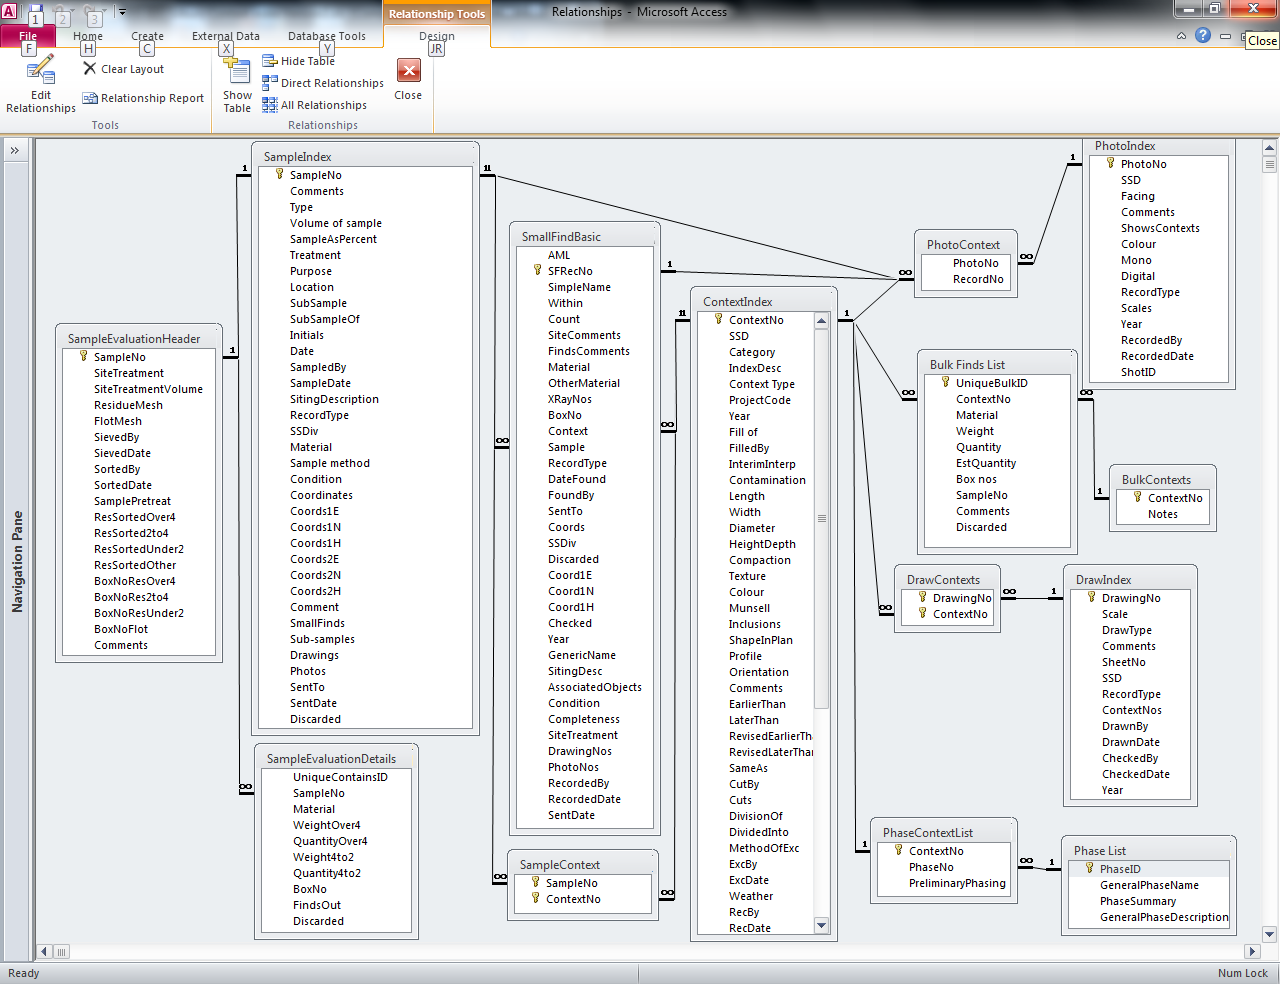 Screenshot of the Silbury Hill archive database relationship diagram (copyright English Heritage)